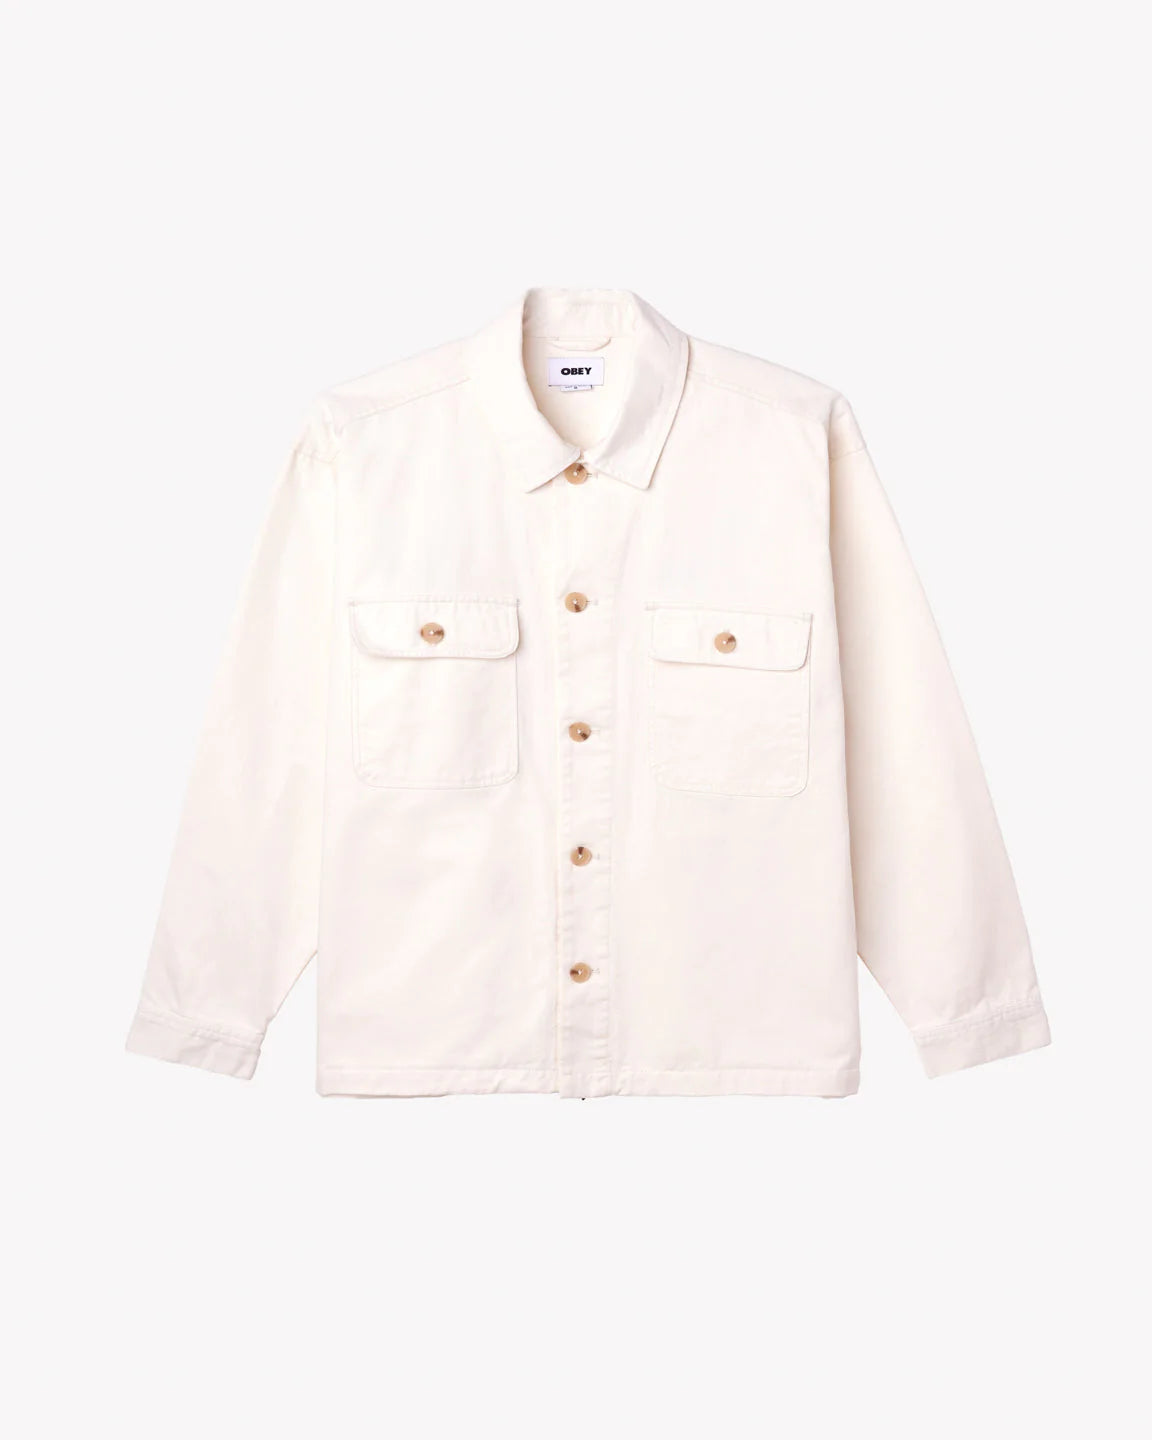 OBEY AFTERNOON SHIRT JACKET -  Unbleached